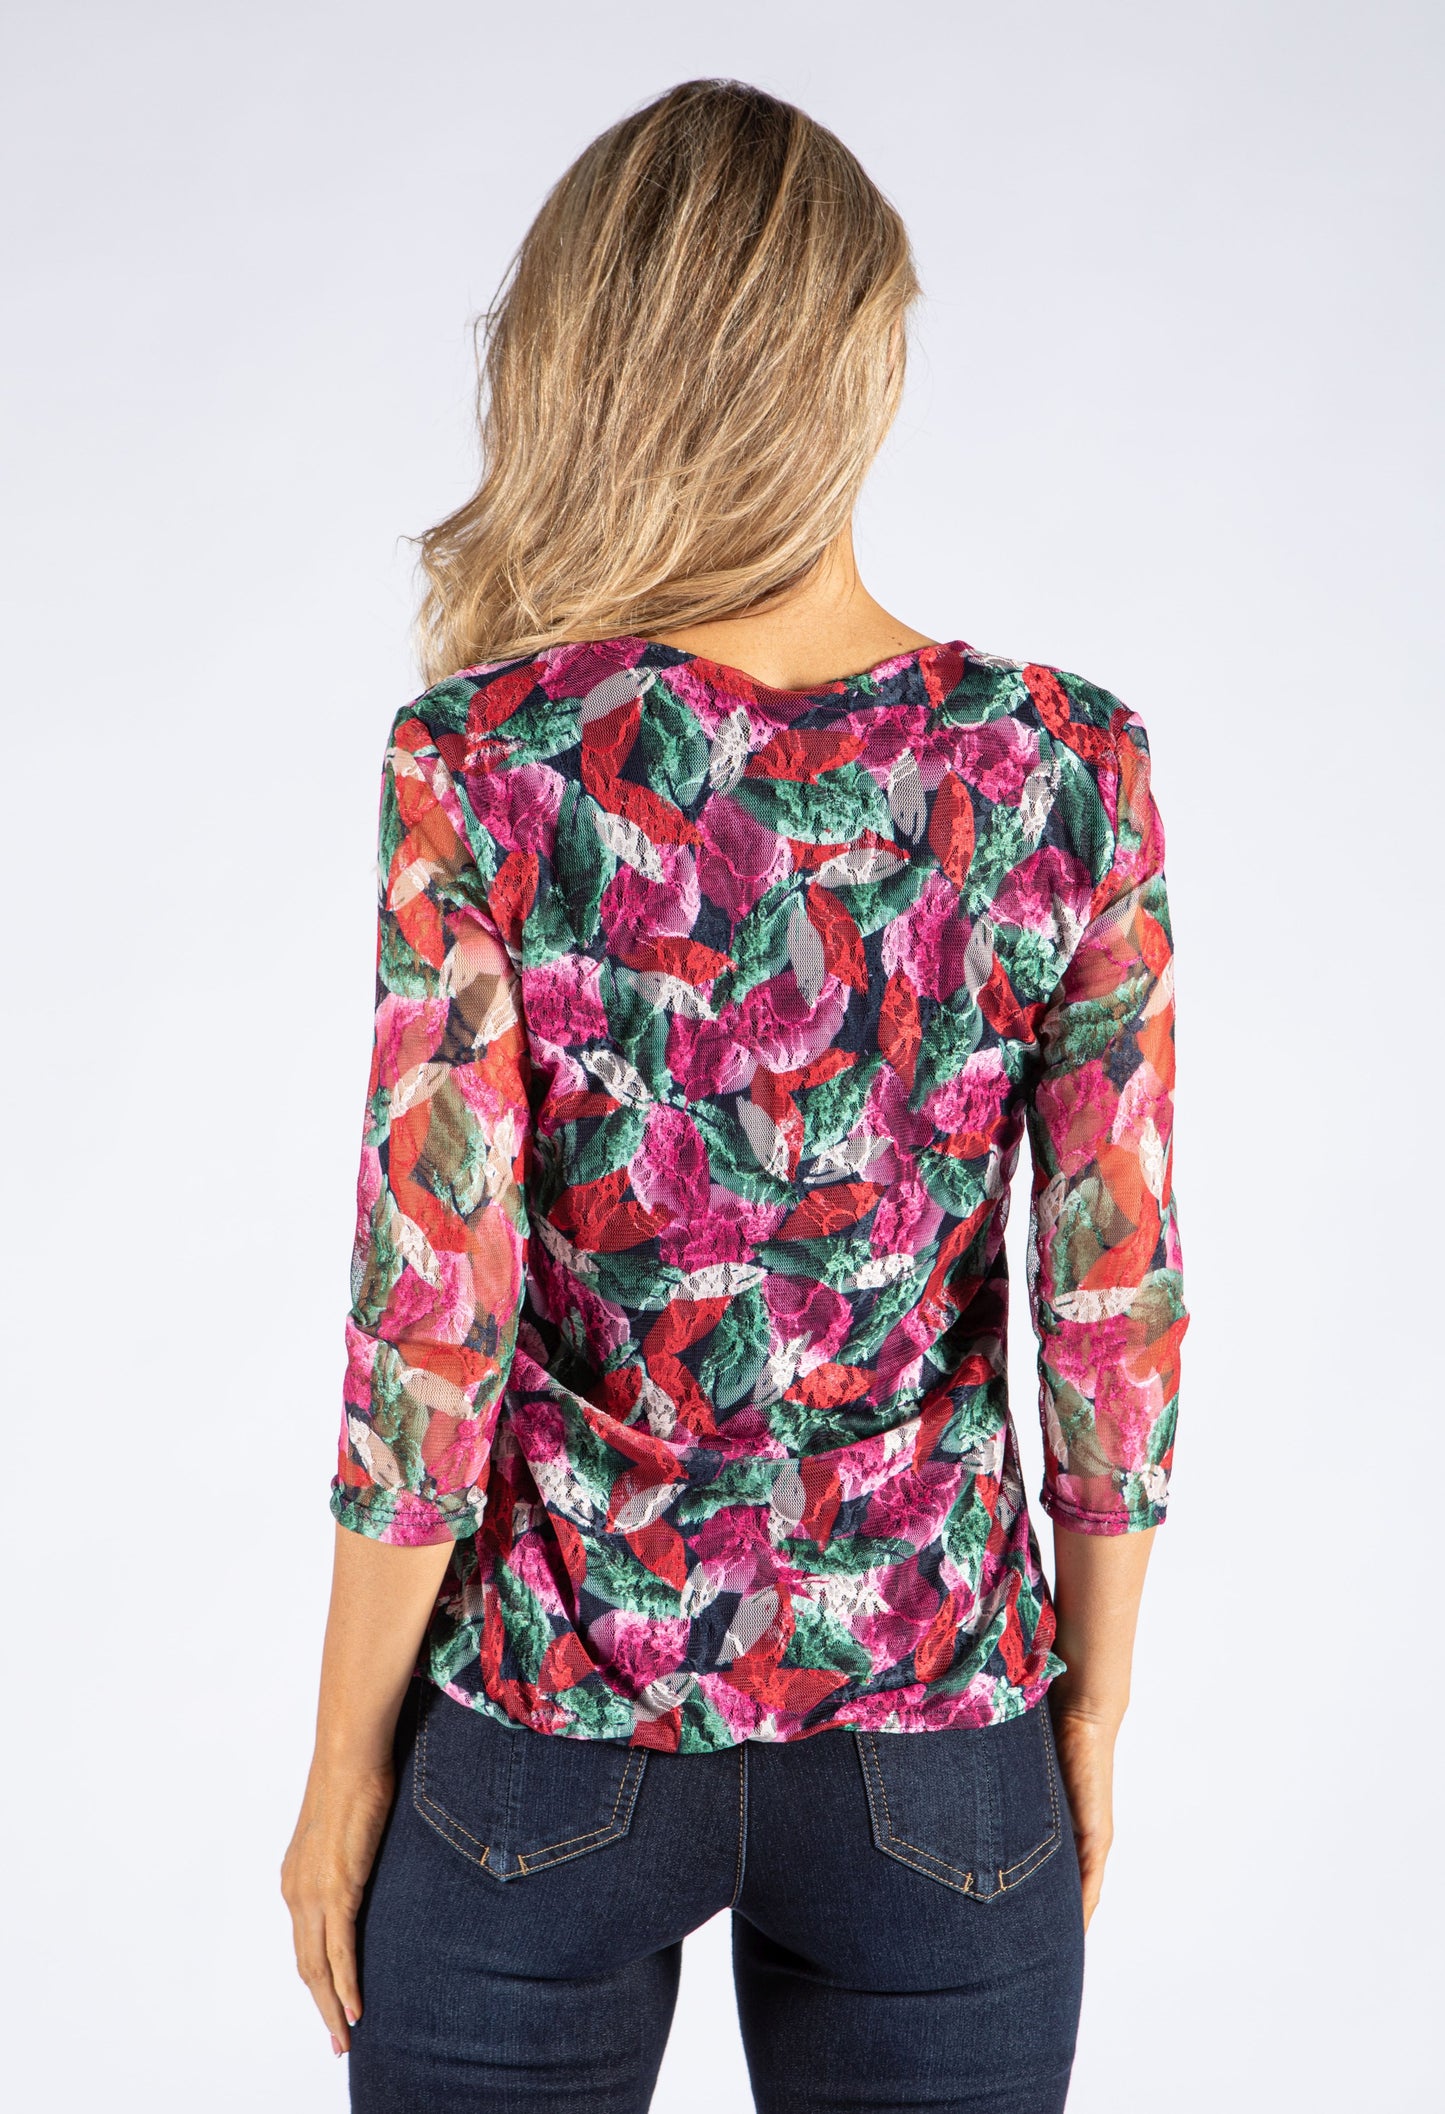 Floral Lace Printed Top